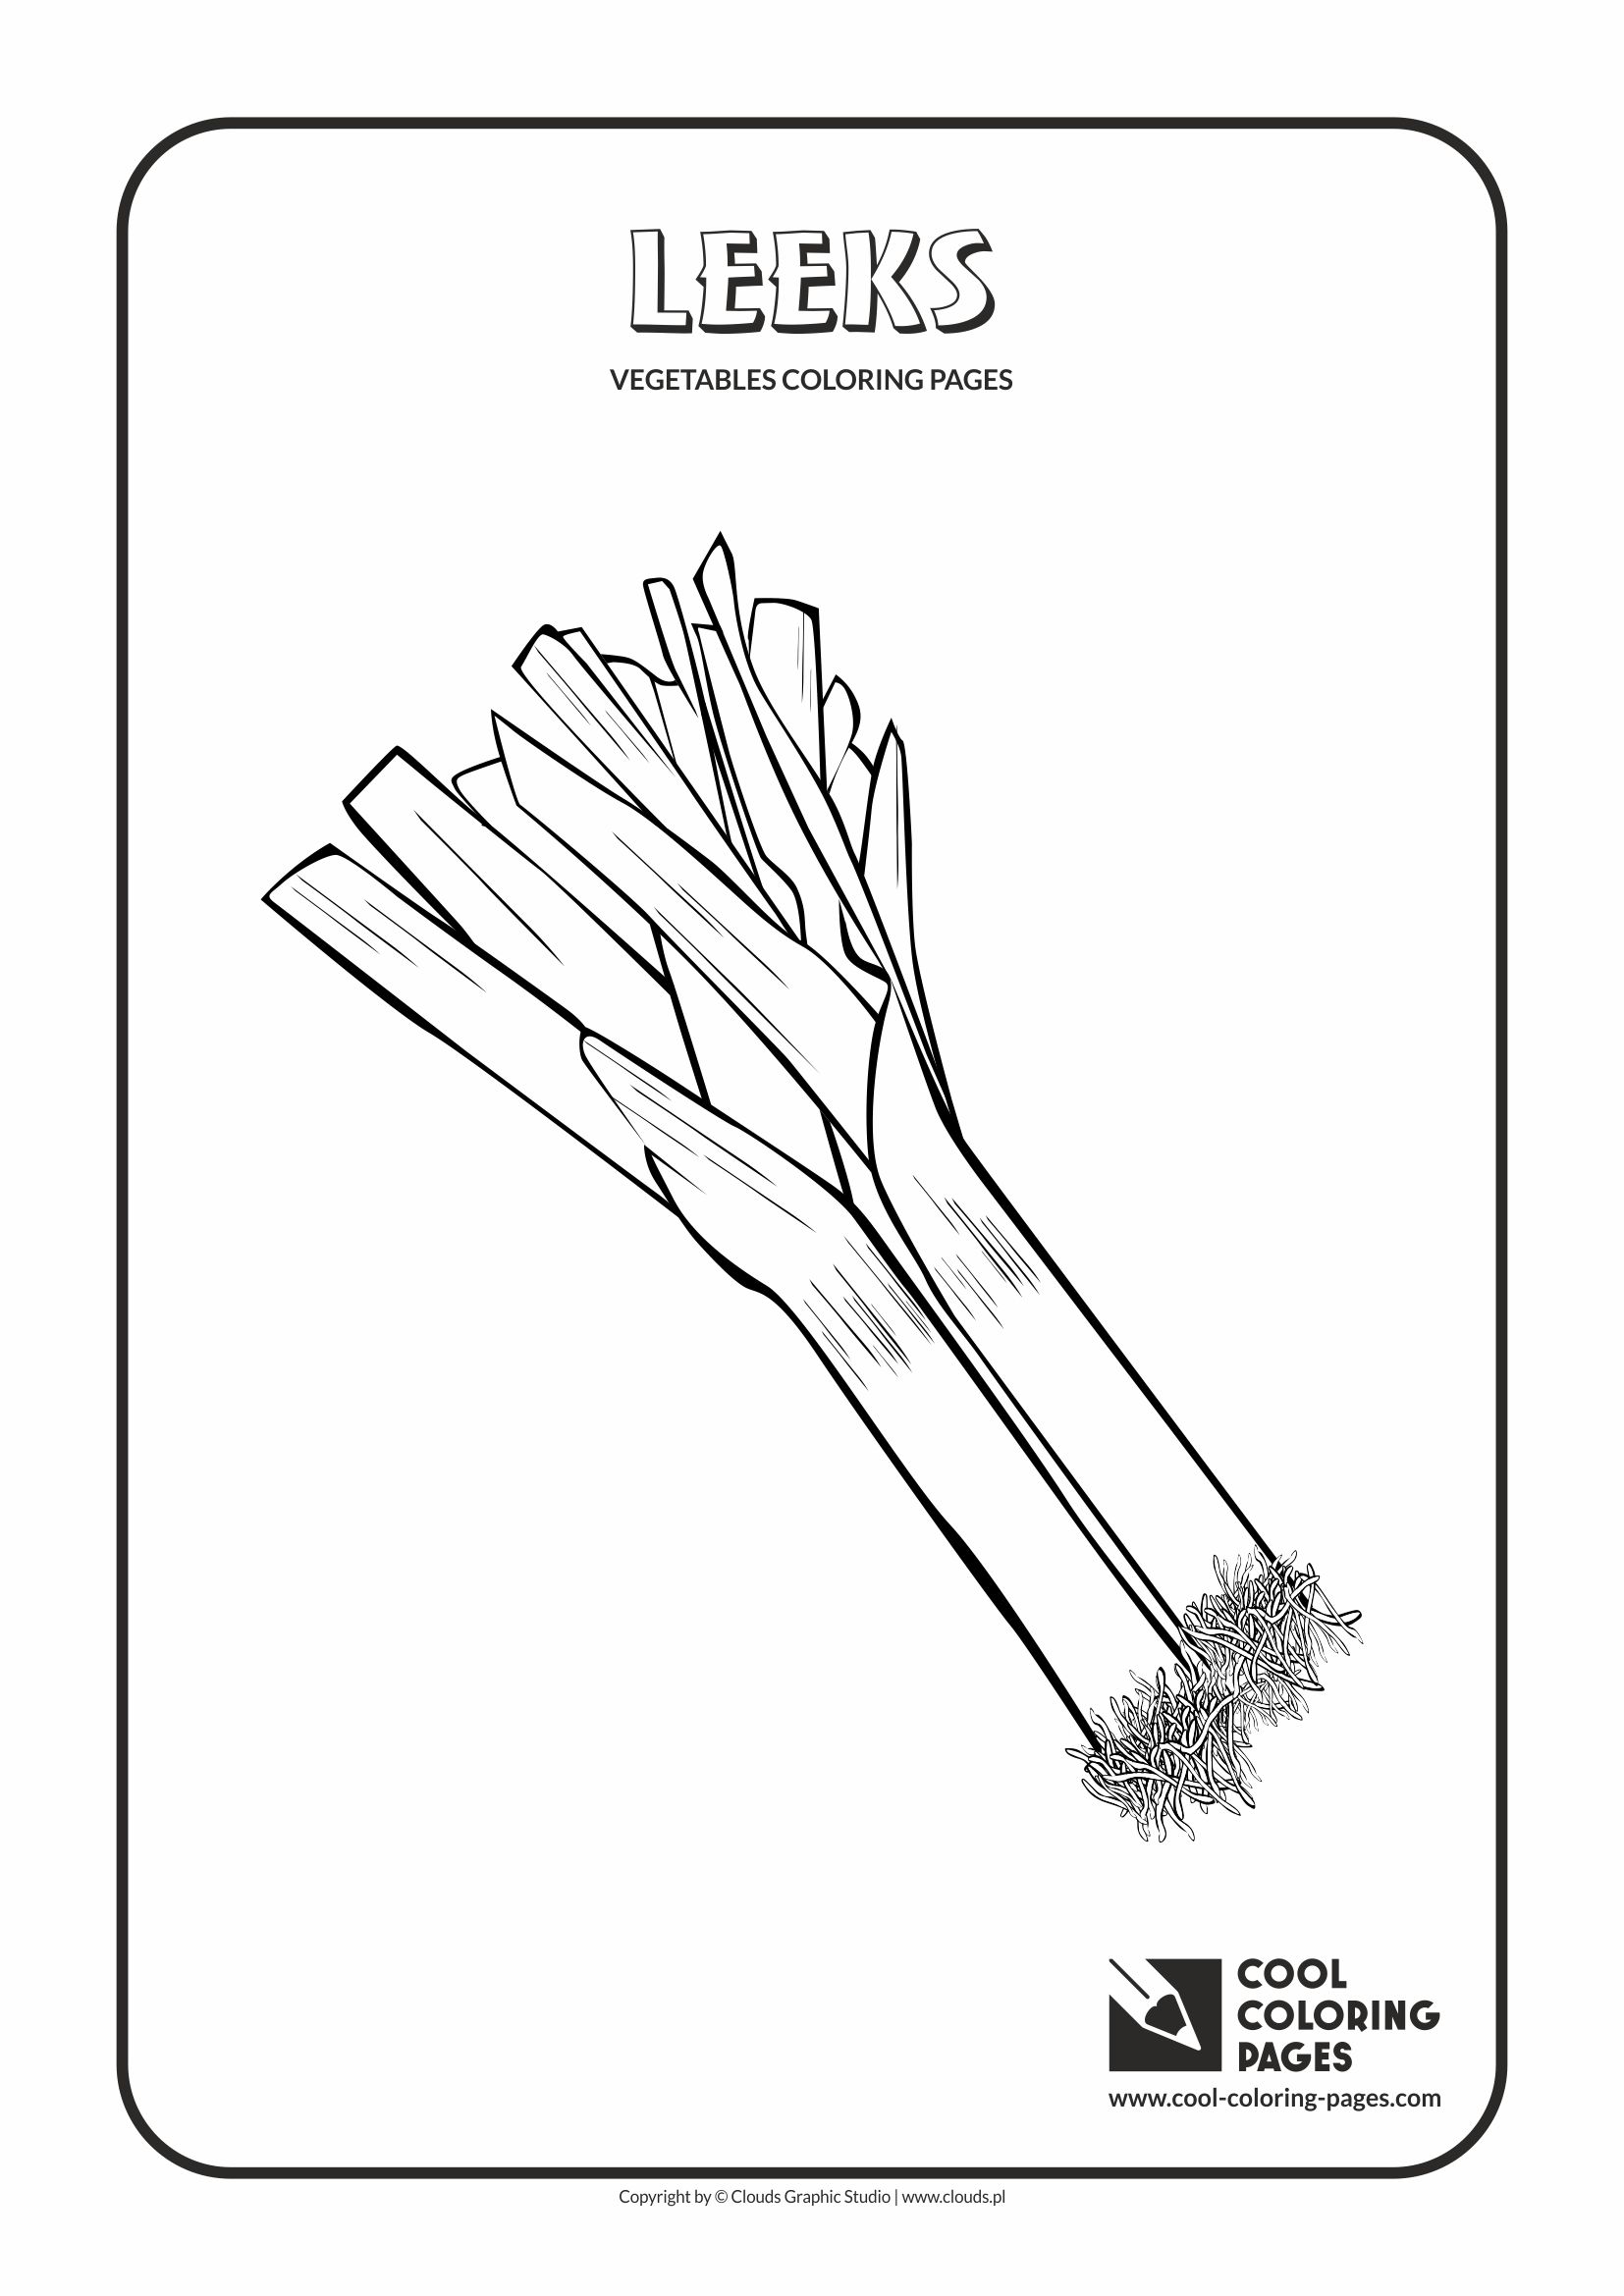 Cool Coloring Pages - Plants / Leeks / Coloring page with leeks